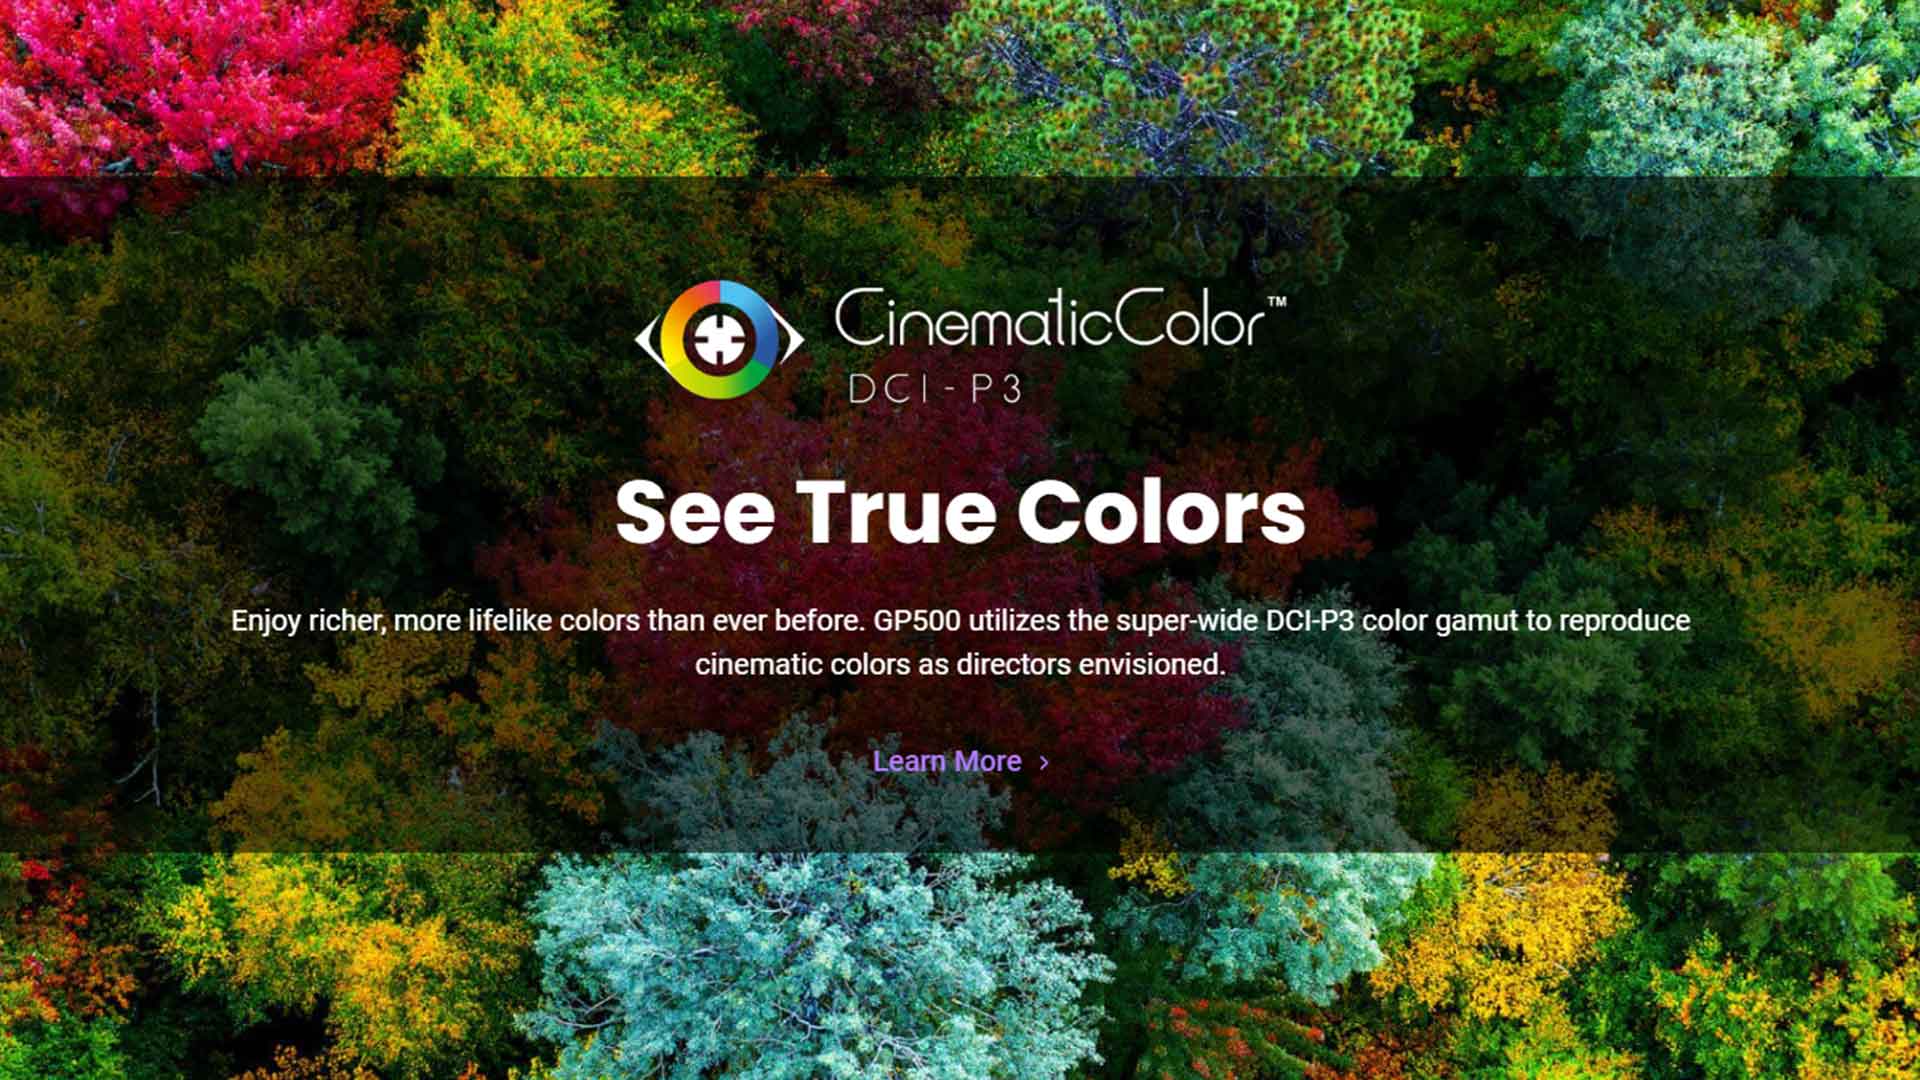 90% Of The Dci-P3 Color Gamut And 97% Of The Rec. 709 Color -Gamut - Projector Reviews - Image